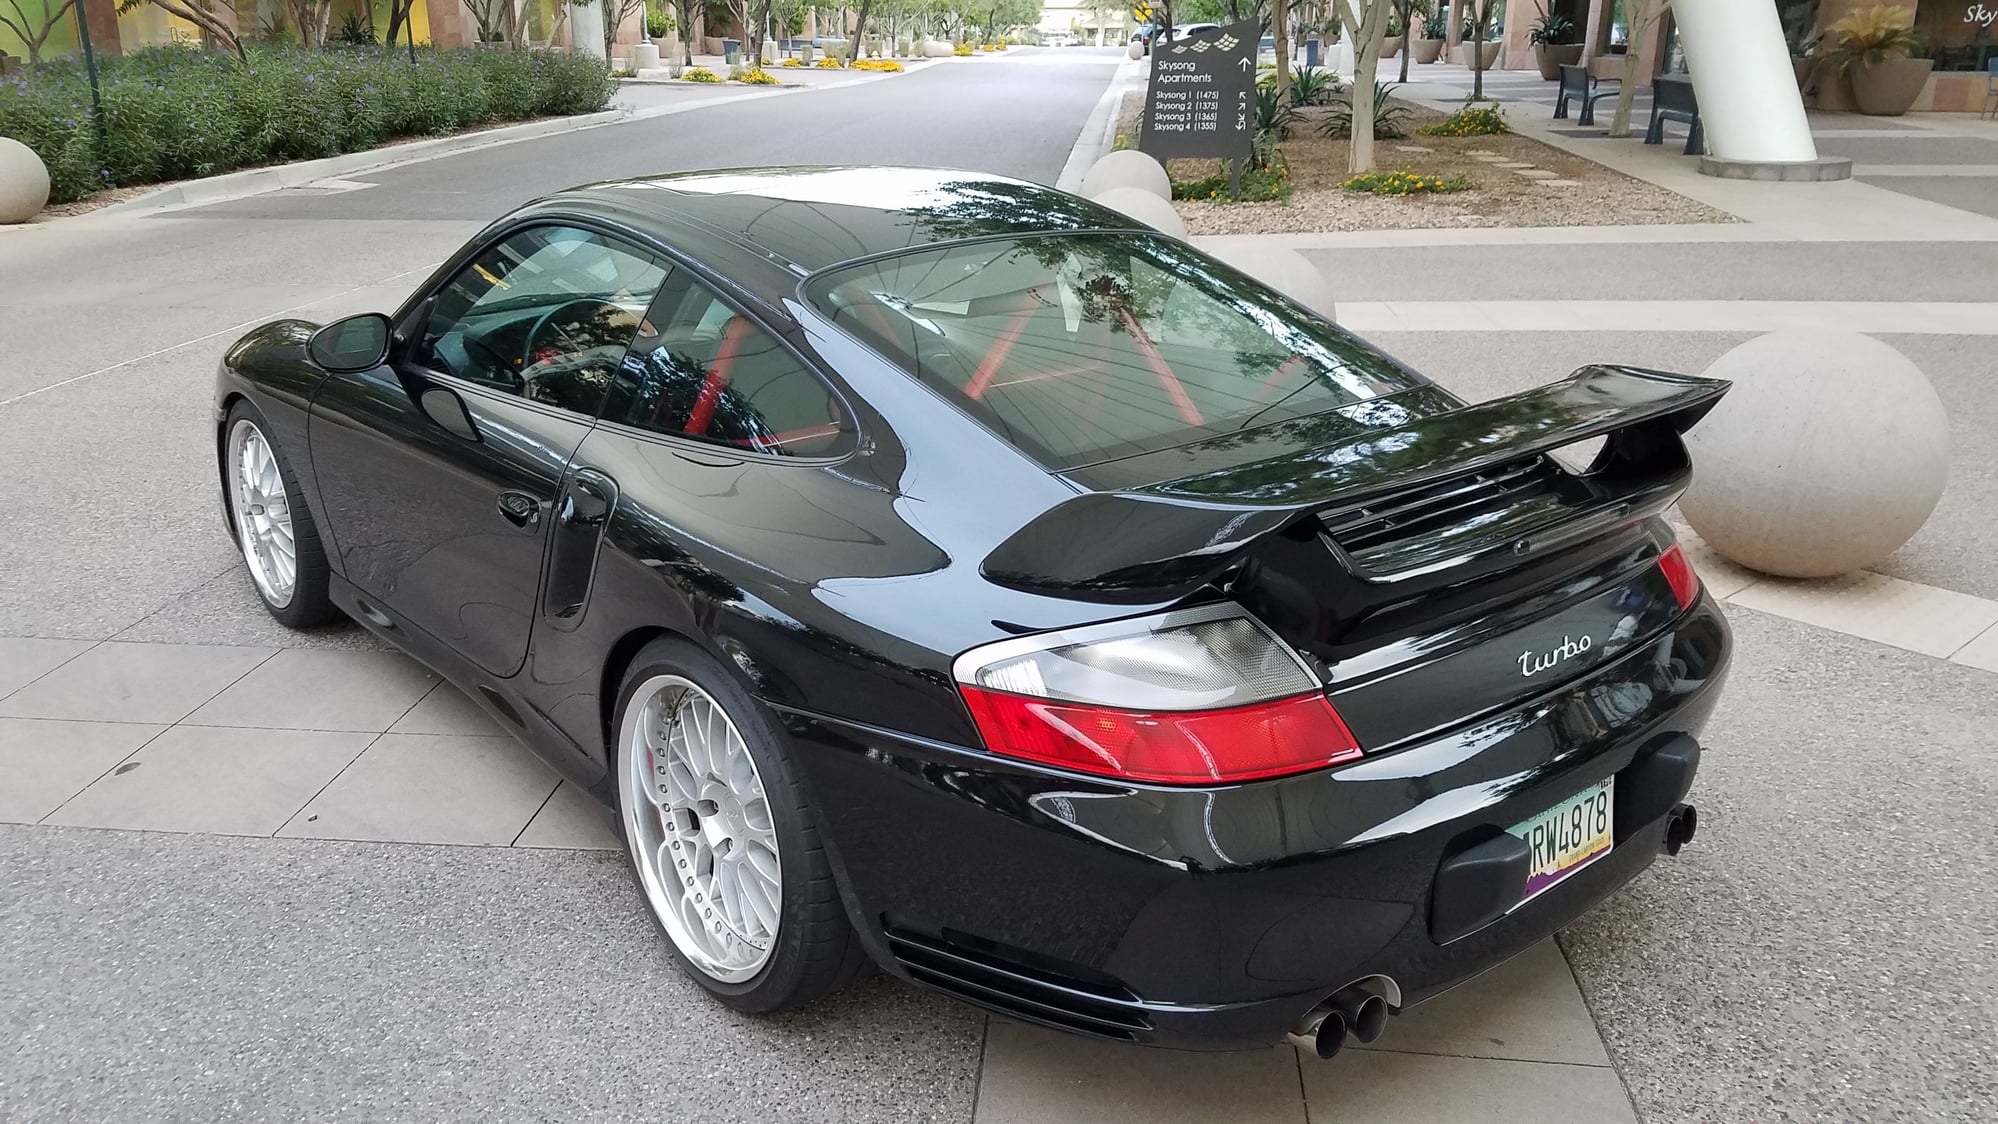 2001 Porsche 911 - 996 turbo with 6 speed in black - Used - VIN WP0AB29981S685740 - 59,000 Miles - 6 cyl - AWD - Manual - Coupe - Black - Tempe, AZ 85281, United States